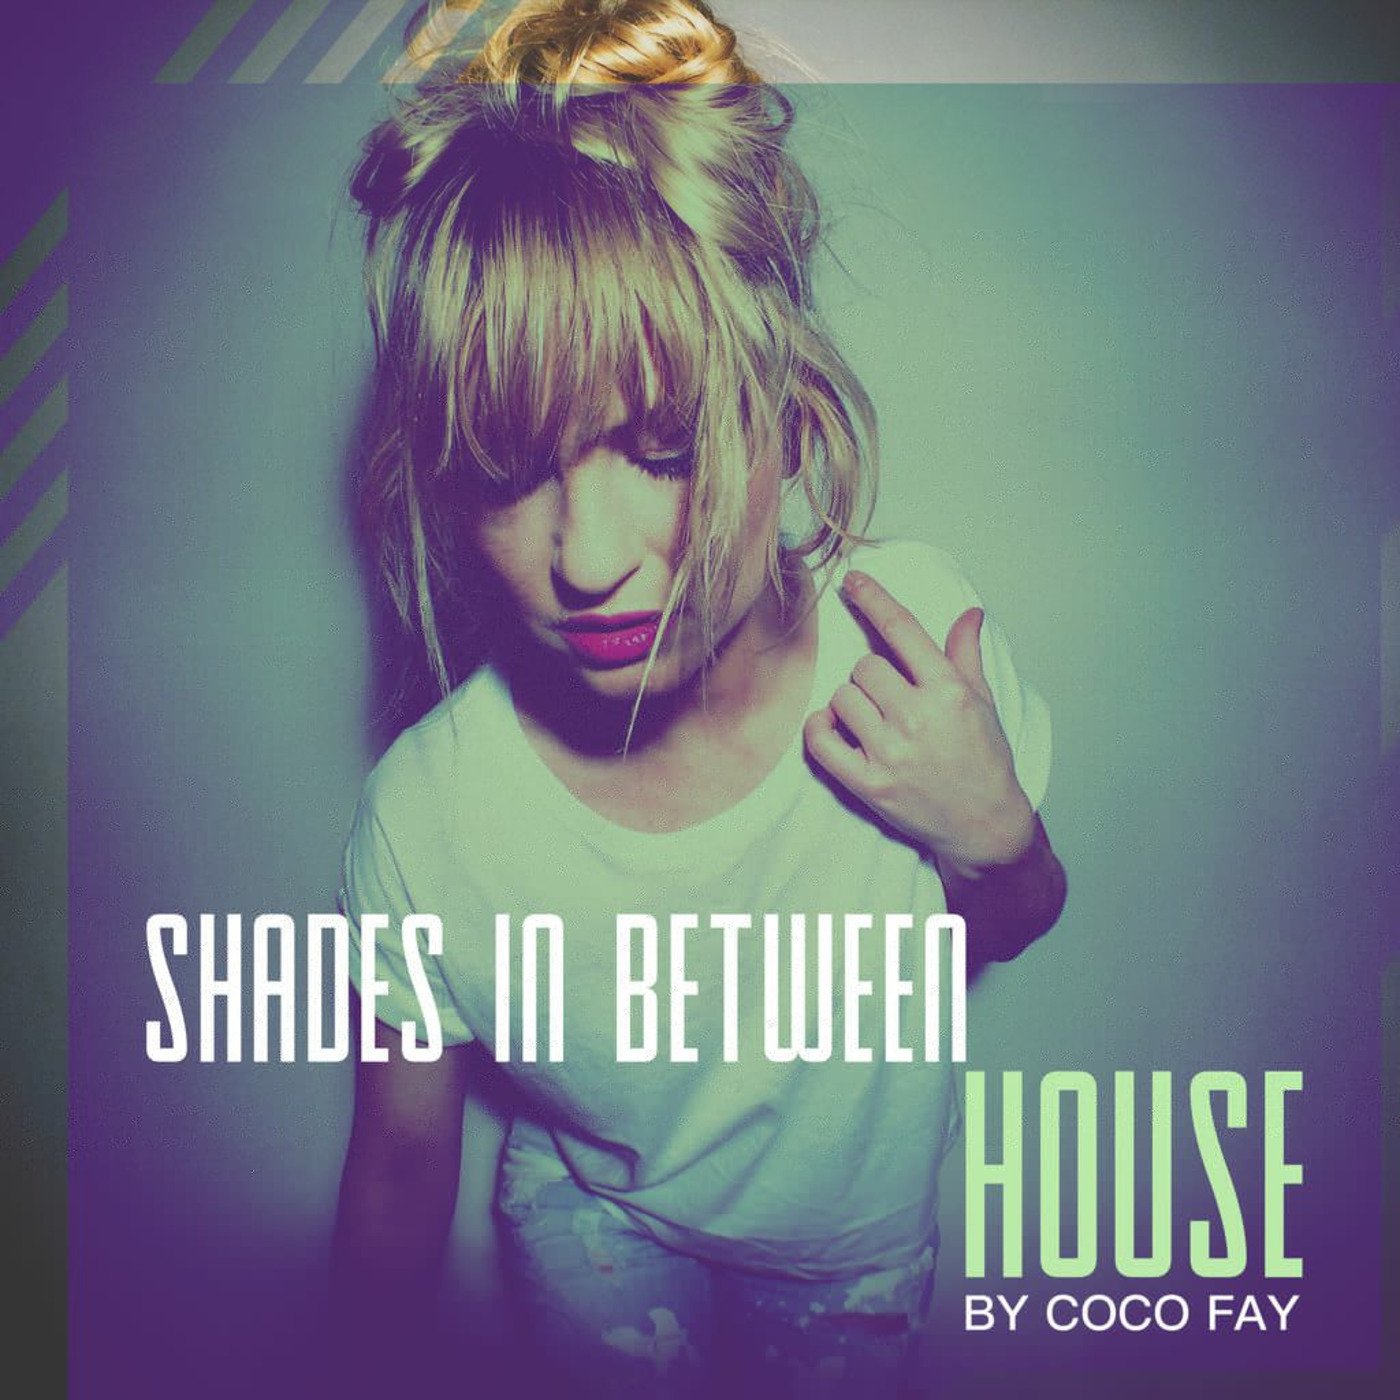 Shades of House #22 by Coco Fay